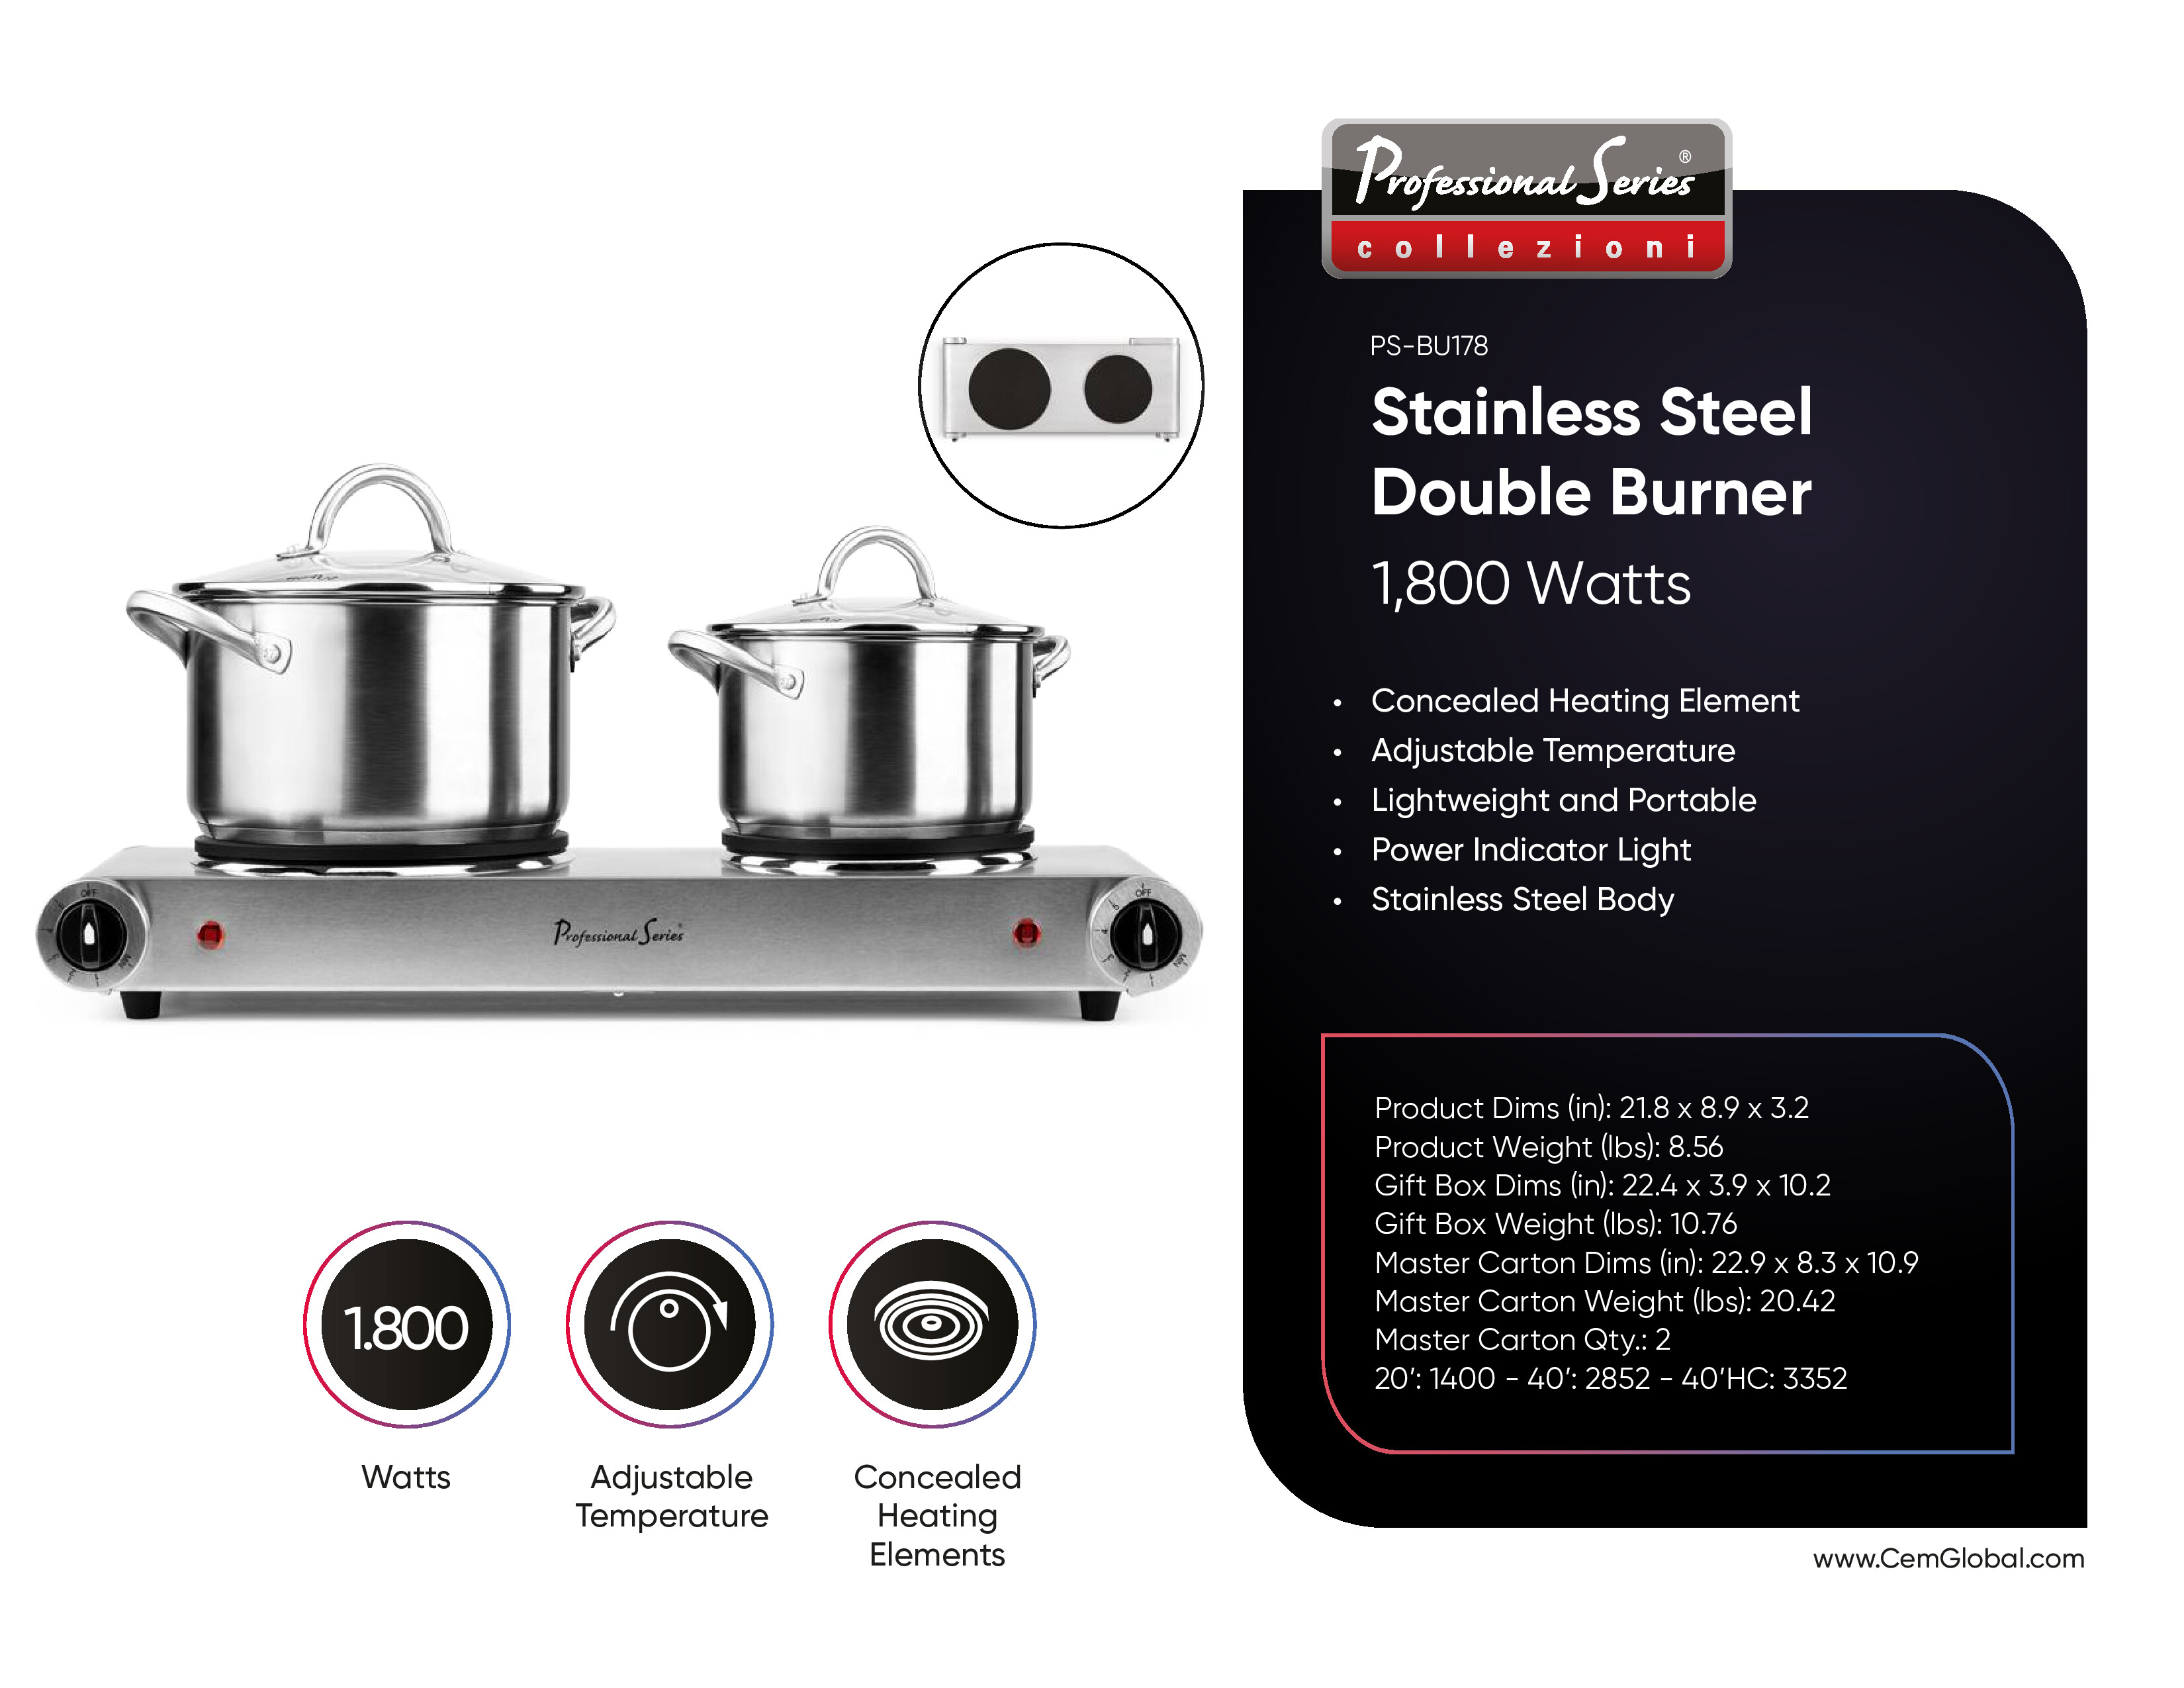 Stainless Steel Double Burner